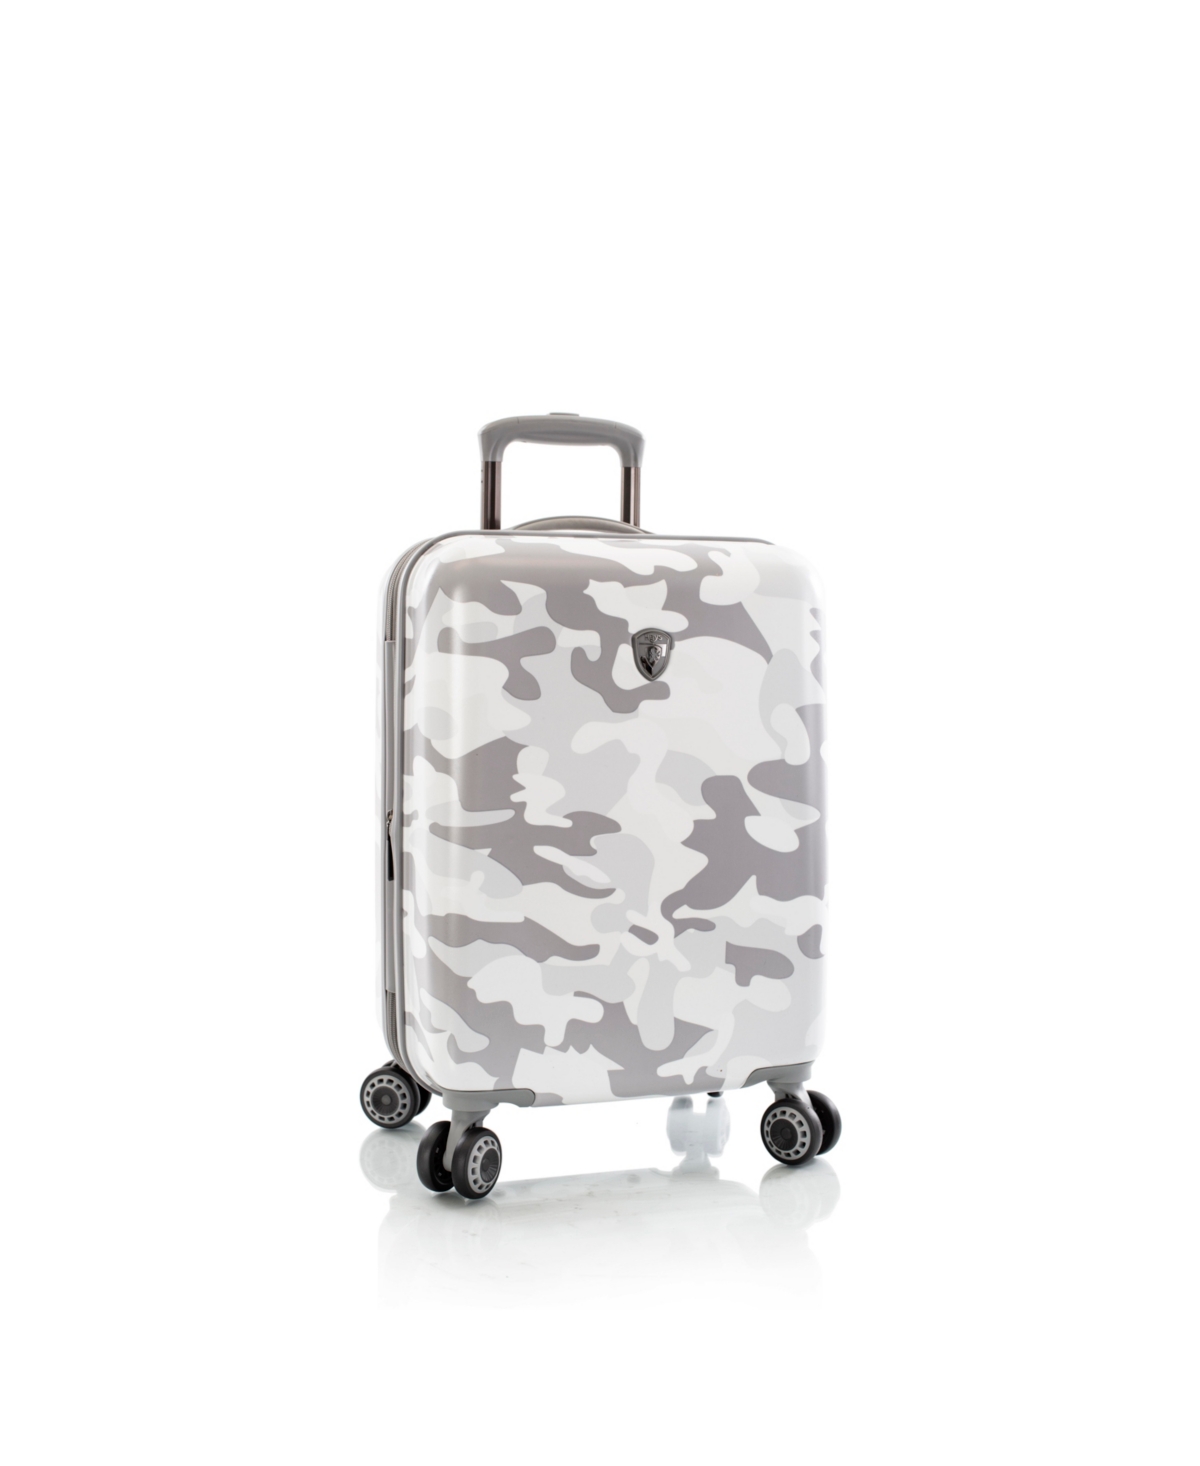 Heys Fashion 21" Hardside Carry-on Spinner Luggage In White Camo